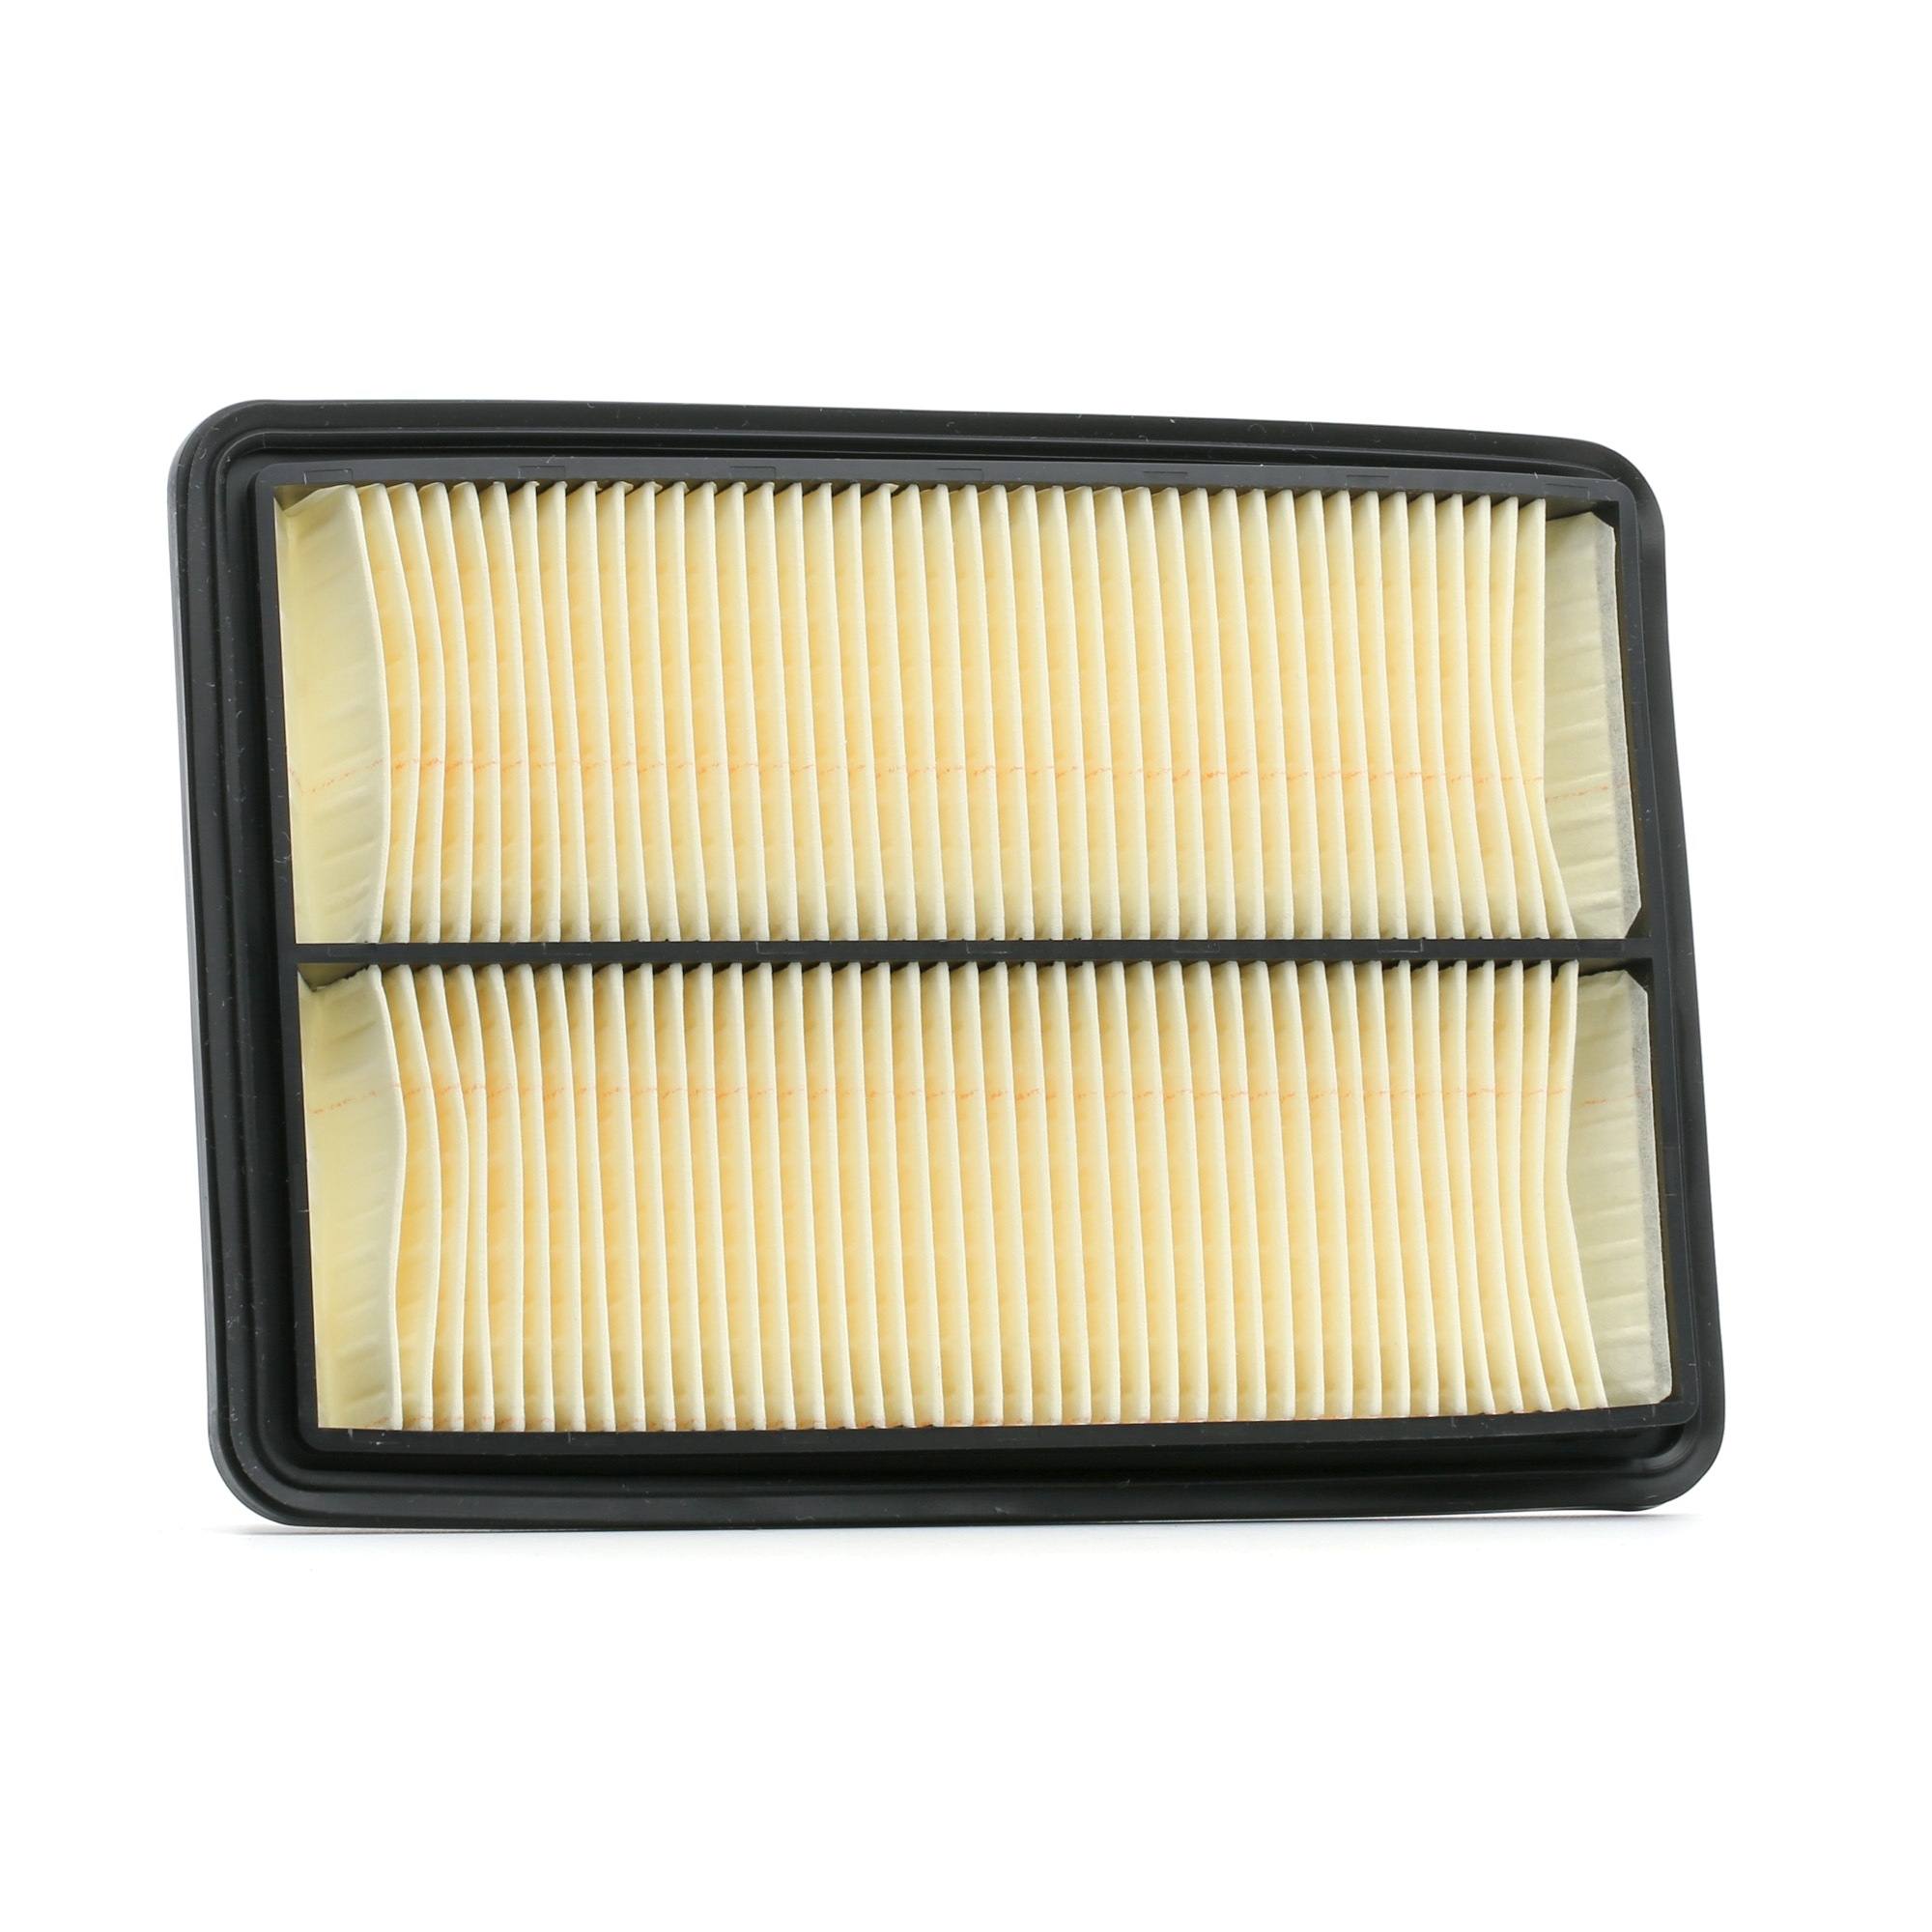 FILTRON AP 124/3 Air filter NISSAN experience and price